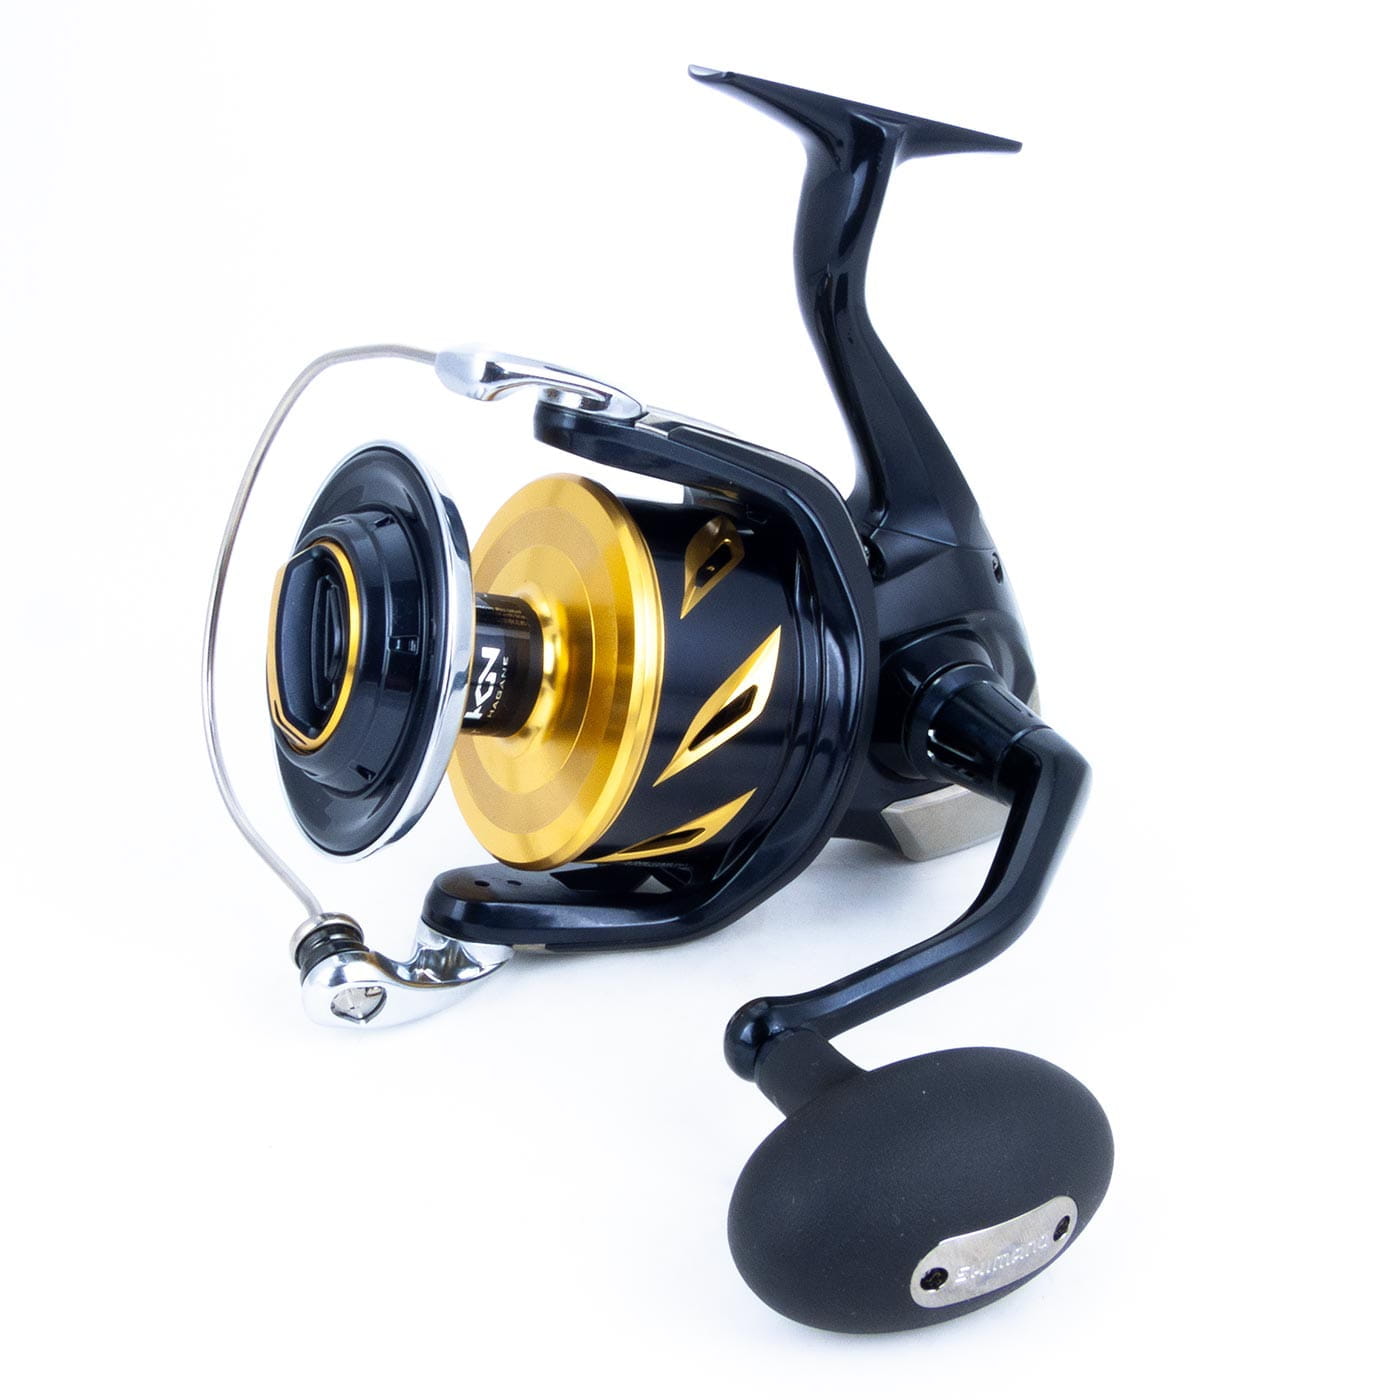 STELLA SW C, SW SPINNING, SPINNING, REELS, PRODUCT